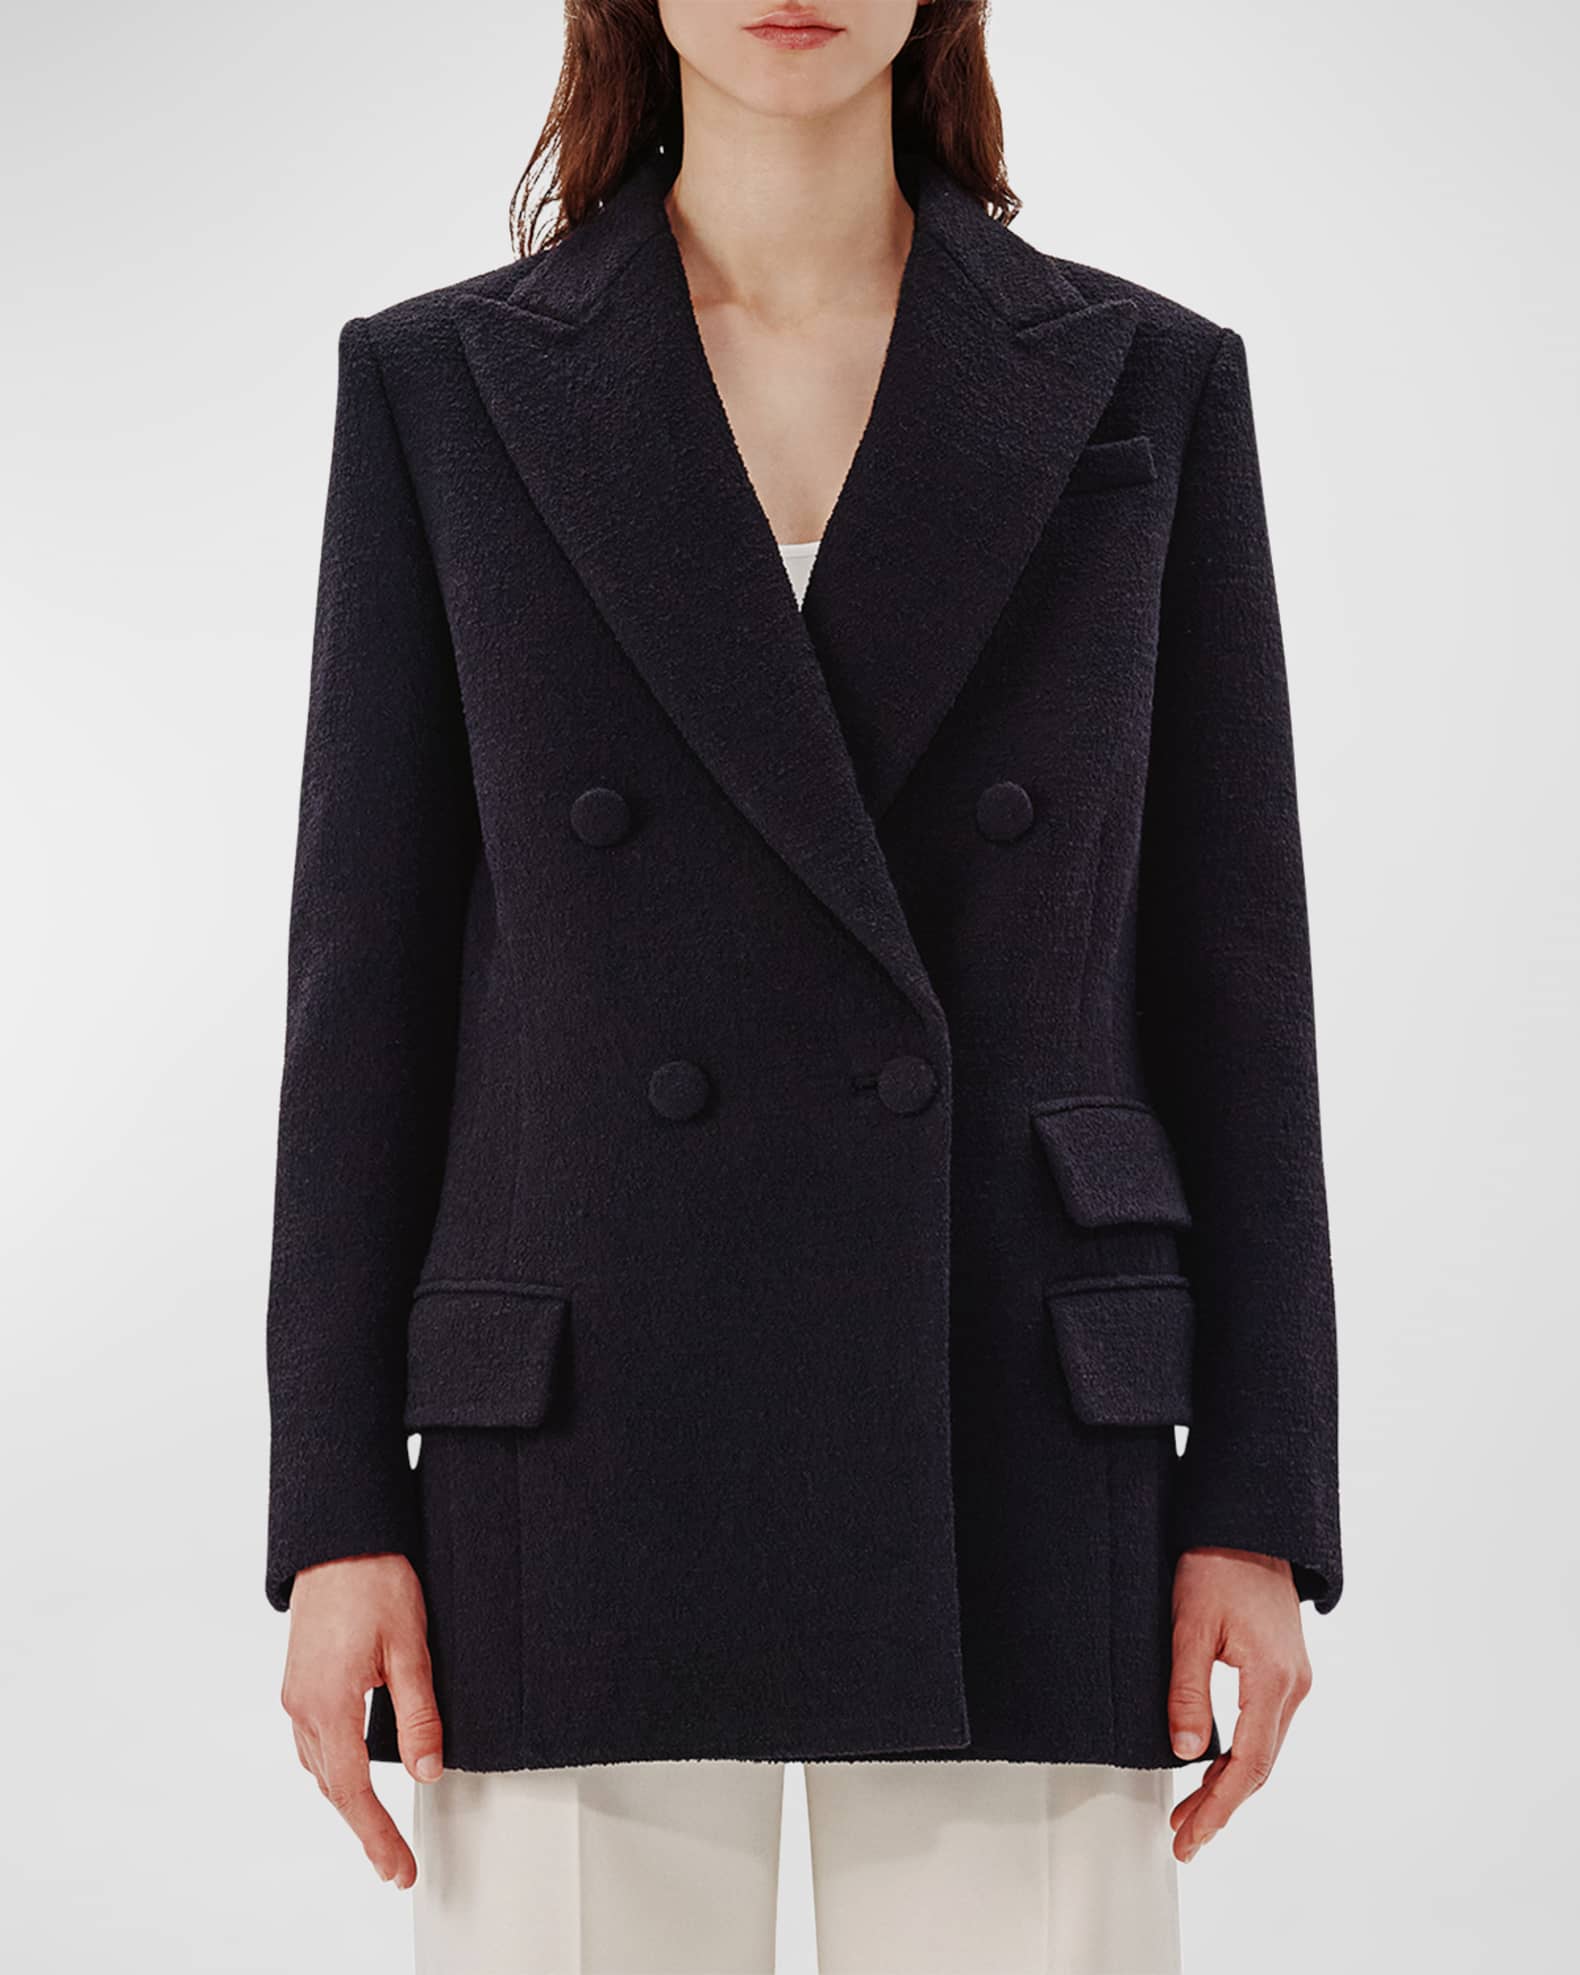 Another Tomorrow Boucle Blazer Coat with Side Zippers | Neiman Marcus